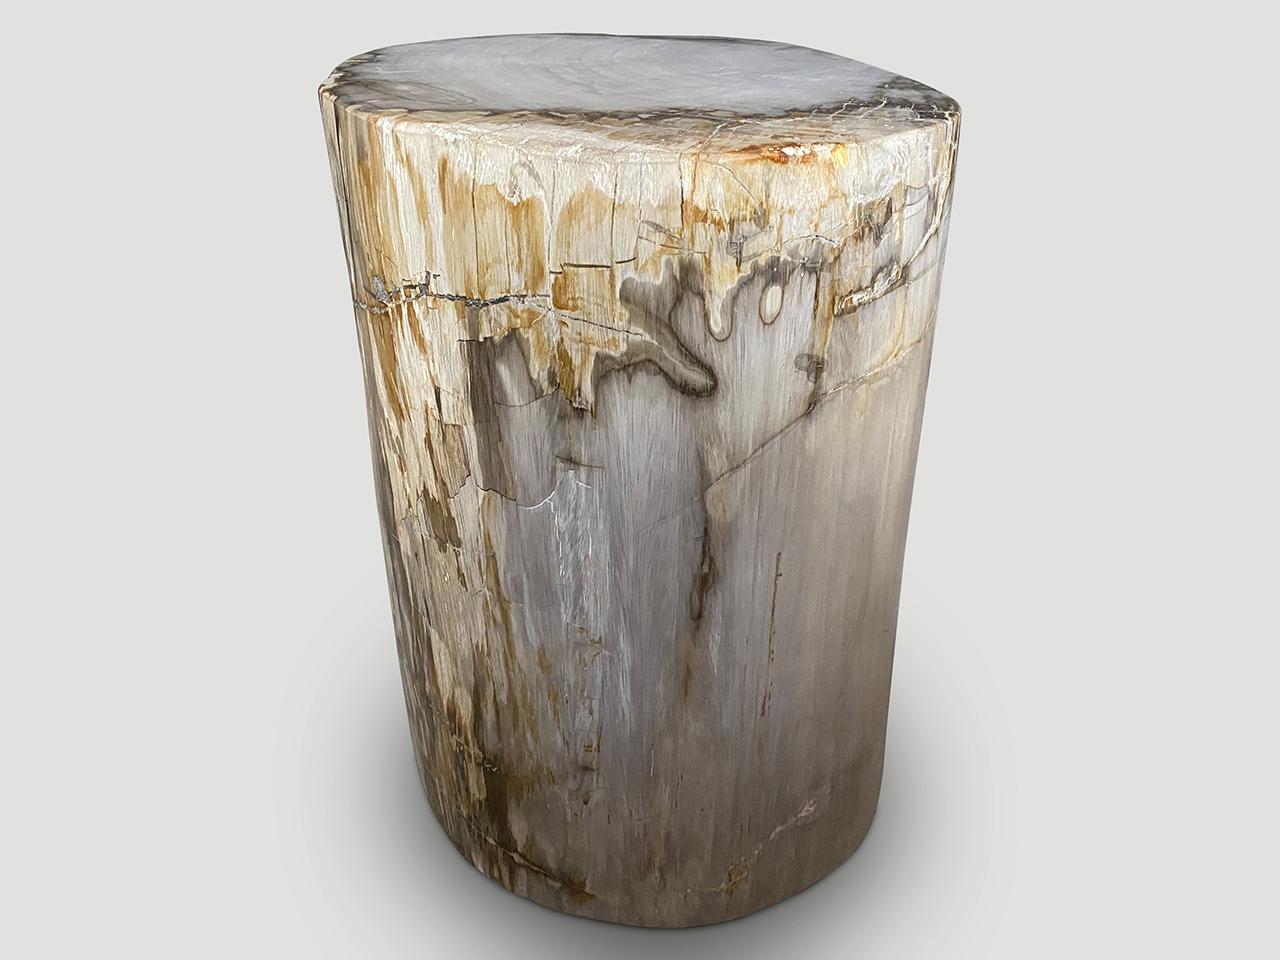 Beautiful grey tones and markings on this high quality petrified wood side table. It’s fascinating how Mother Nature produces these exquisite 40 million year old petrified teak logs with such contrasting colors and natural patterns throughout.